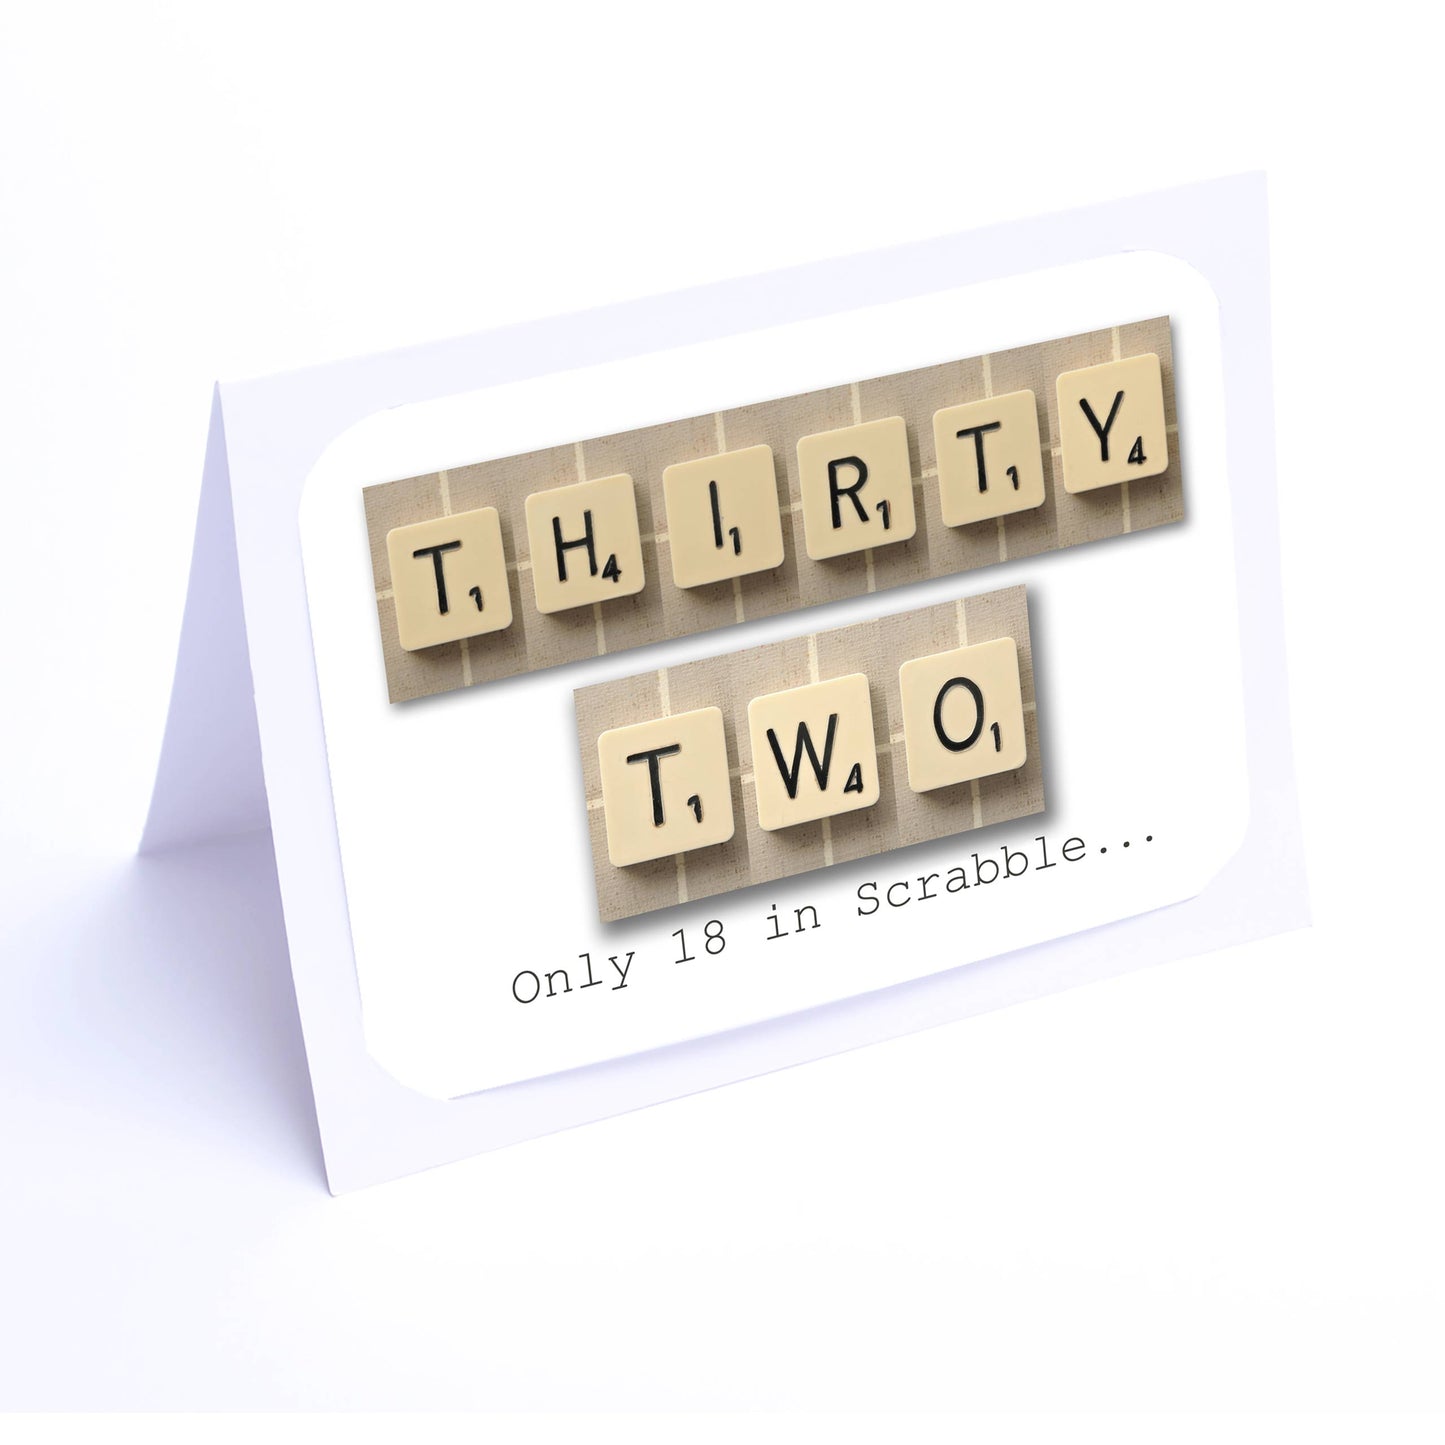 Scrabble Birthday Card Decade  30-39  years Scrabble Cards Any year available